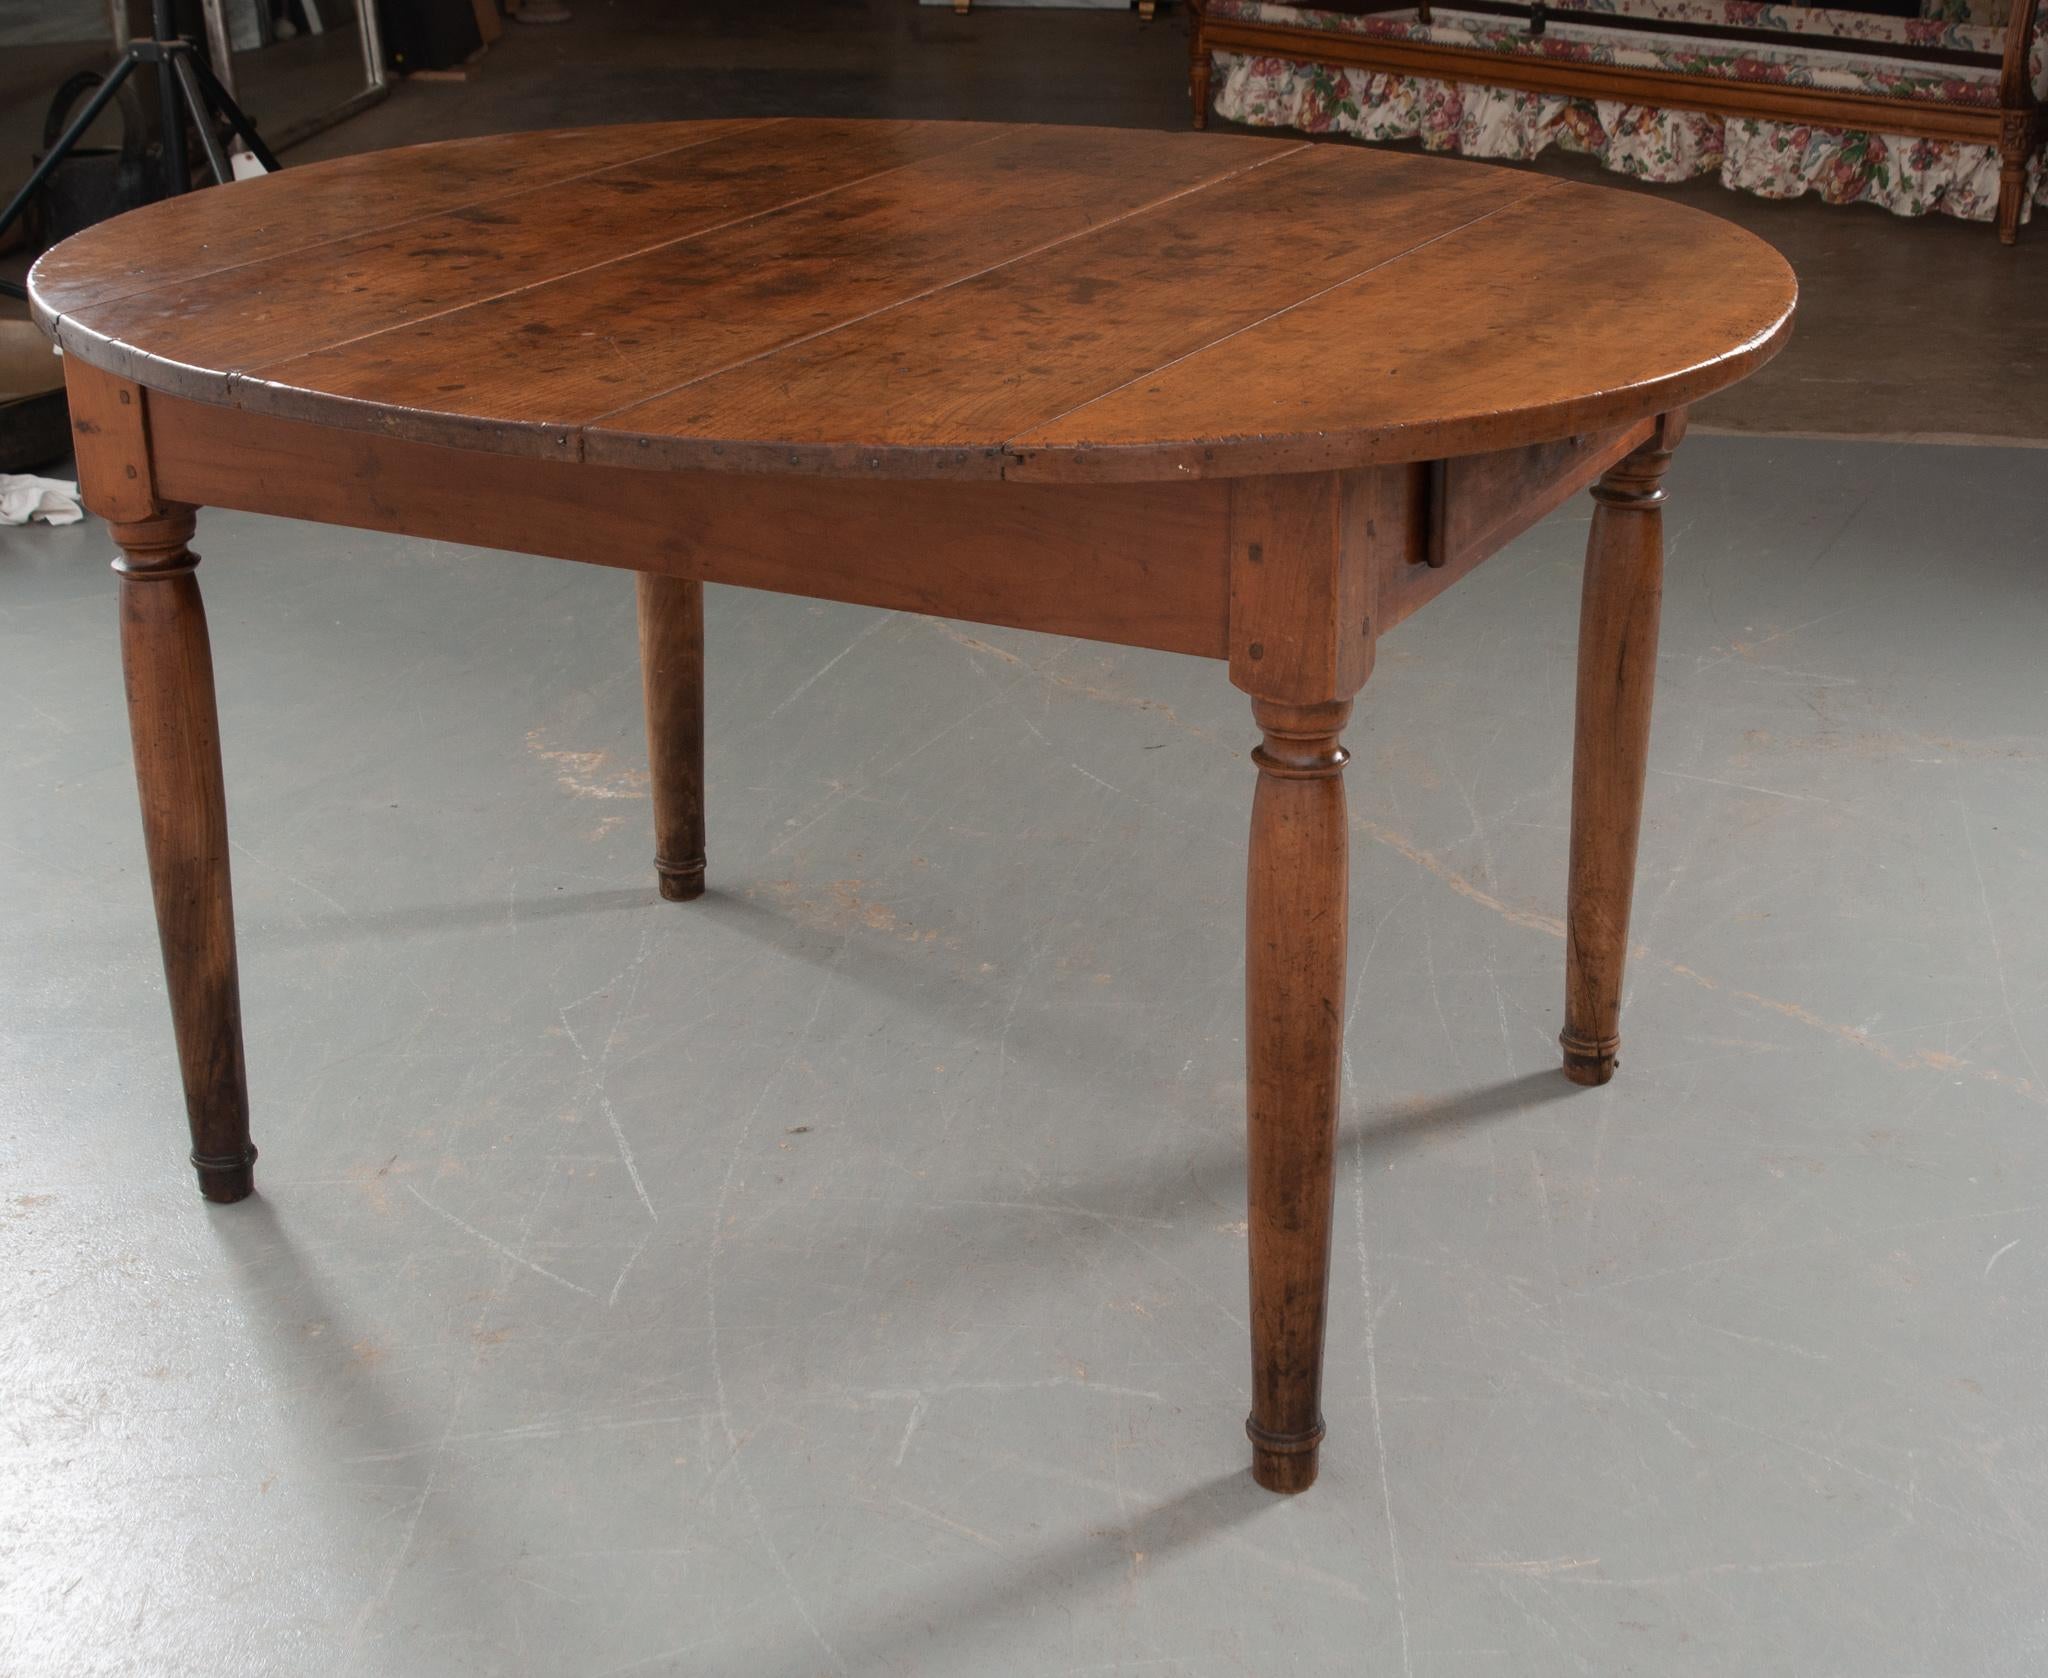 An incredibly charming solid walnut dining room table from 19th century France! The wood is fabulously patinated with many marks of past lives lived. A sizable apron houses a single drawer fixed with a simple turned pull. Opening the drawer reveals